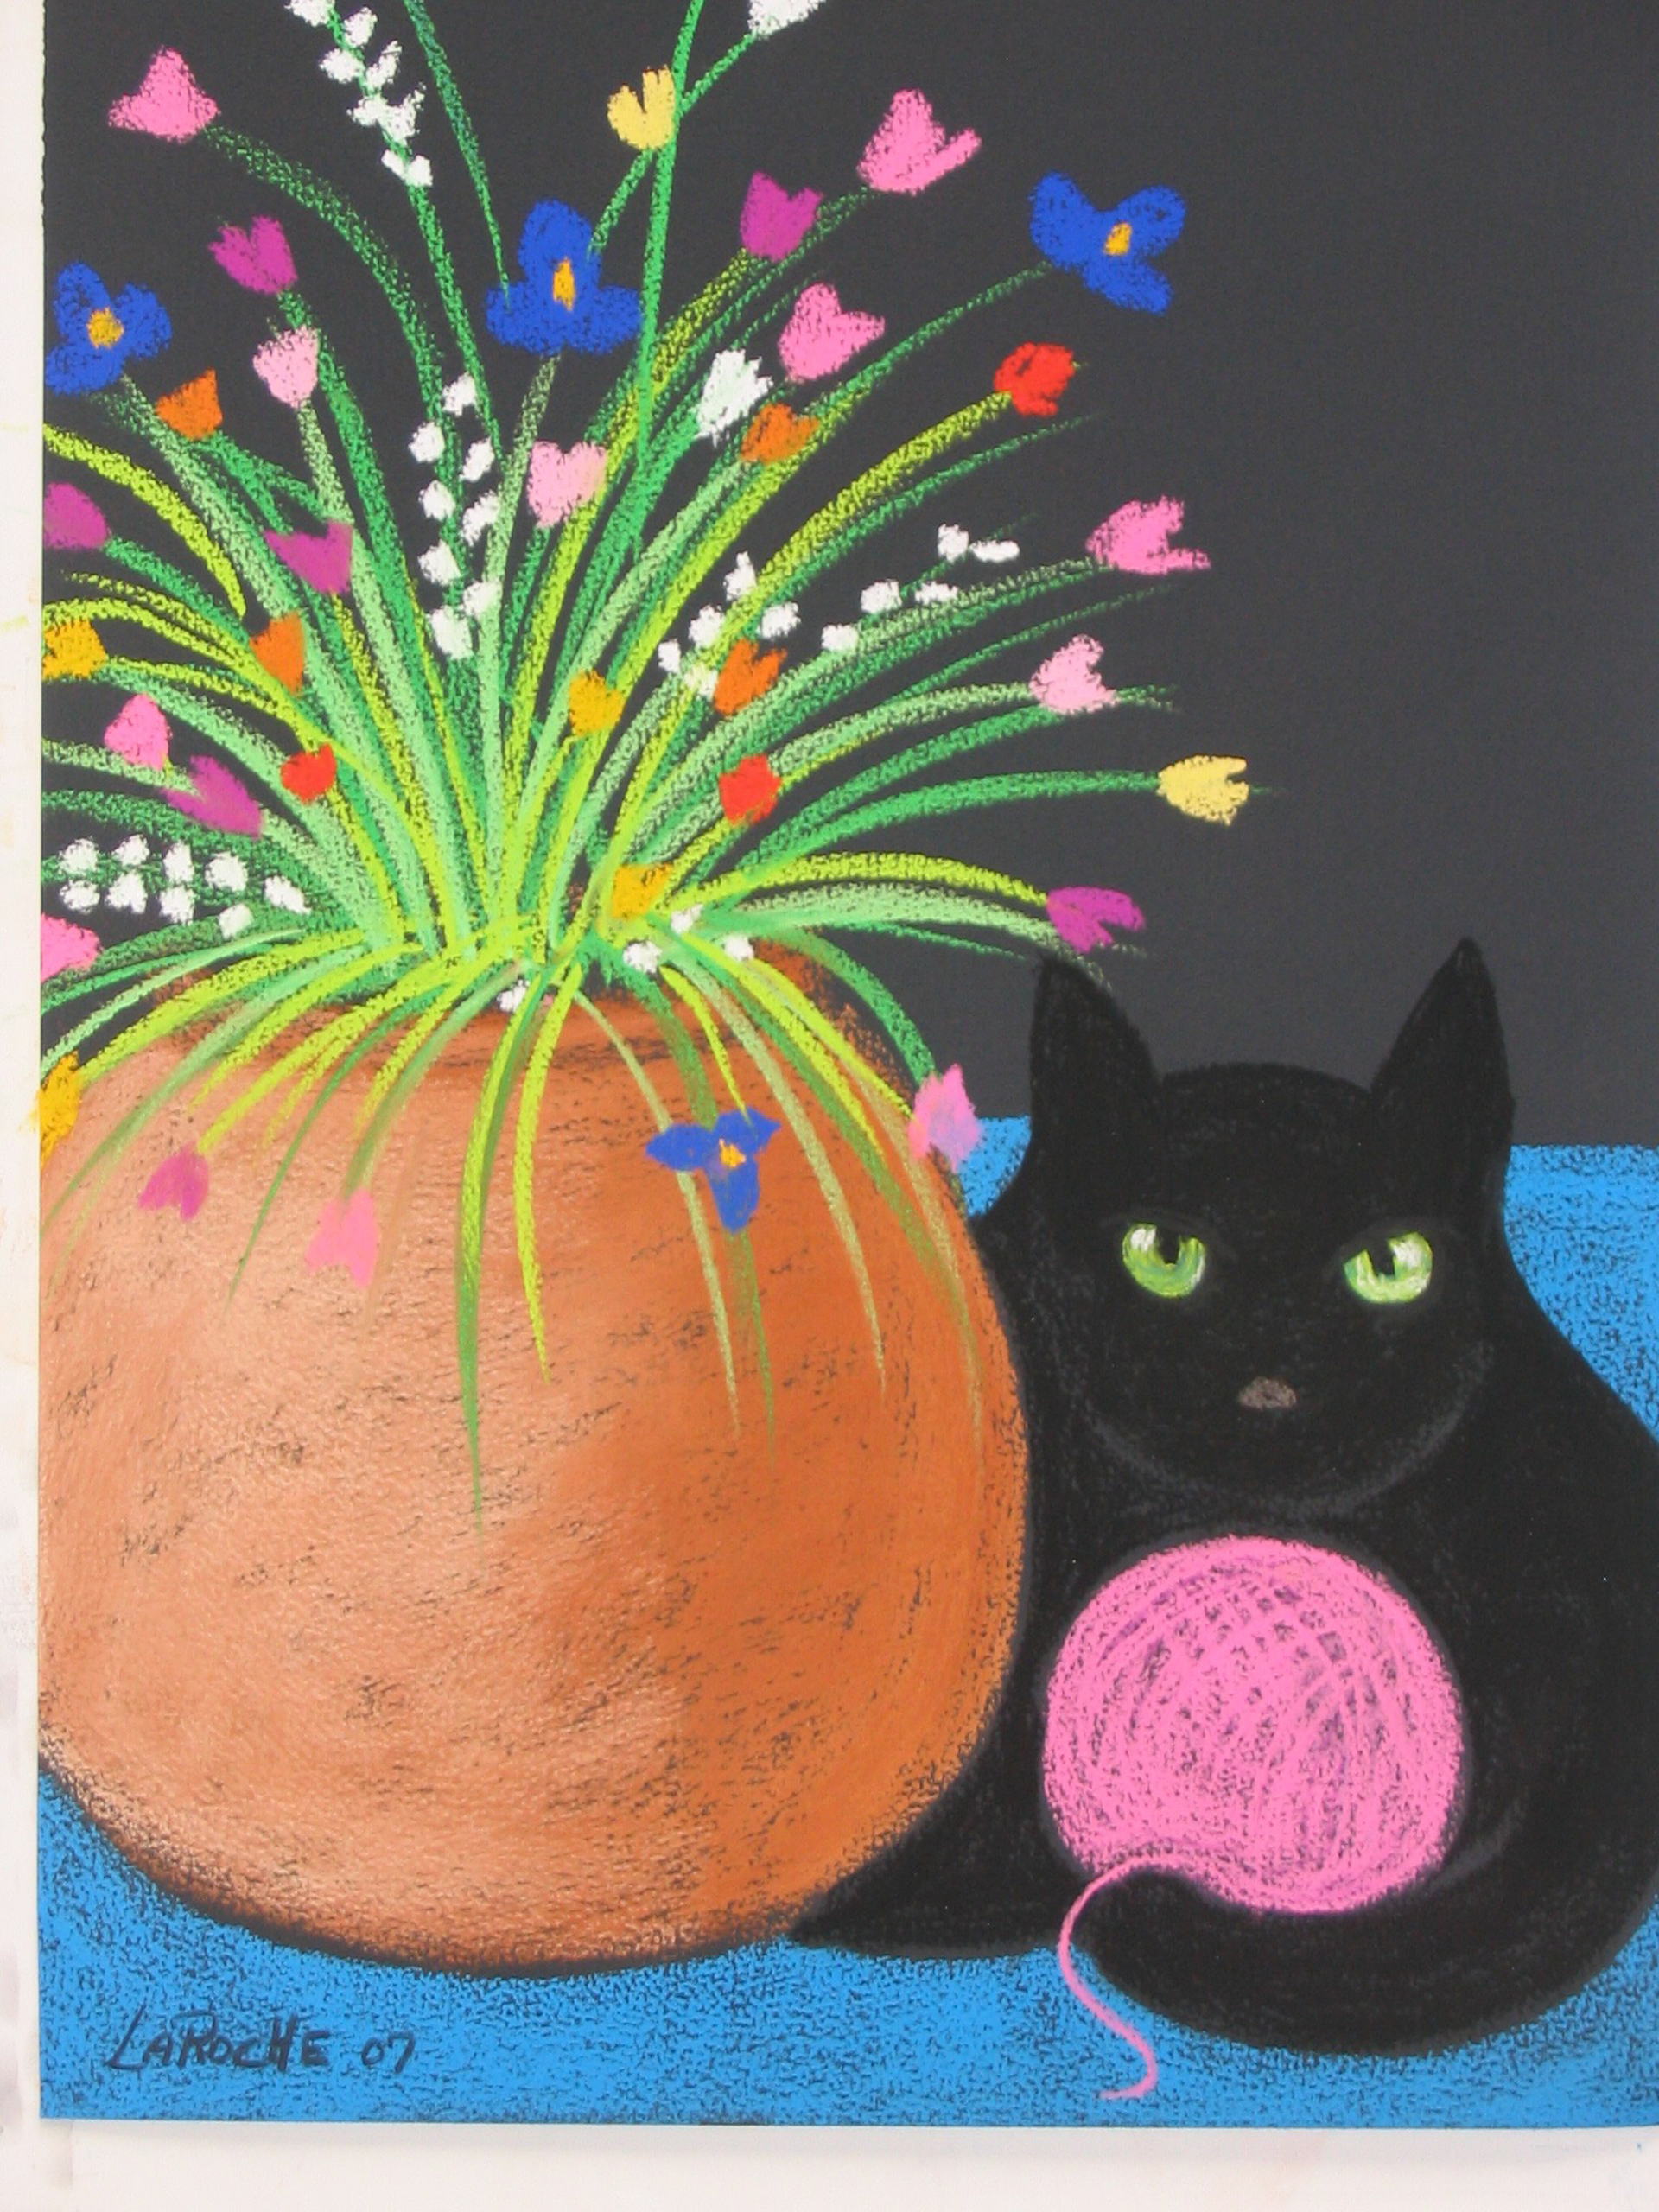 Black Cat Knitting - SOLD available for commission by Carole LaRoche